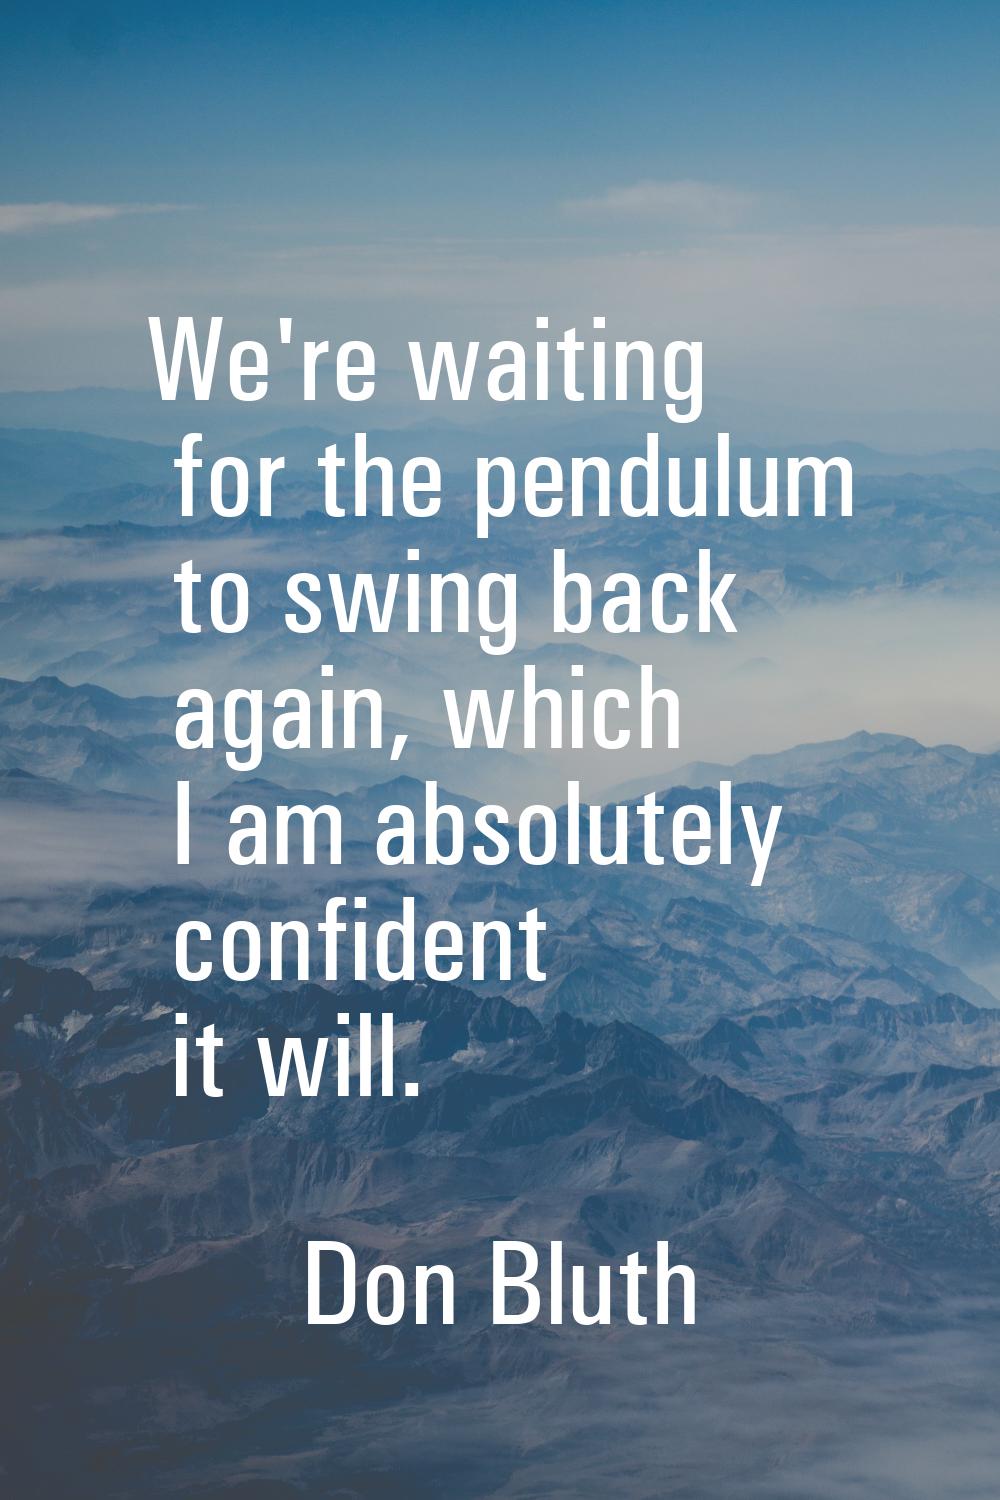 We're waiting for the pendulum to swing back again, which I am absolutely confident it will.